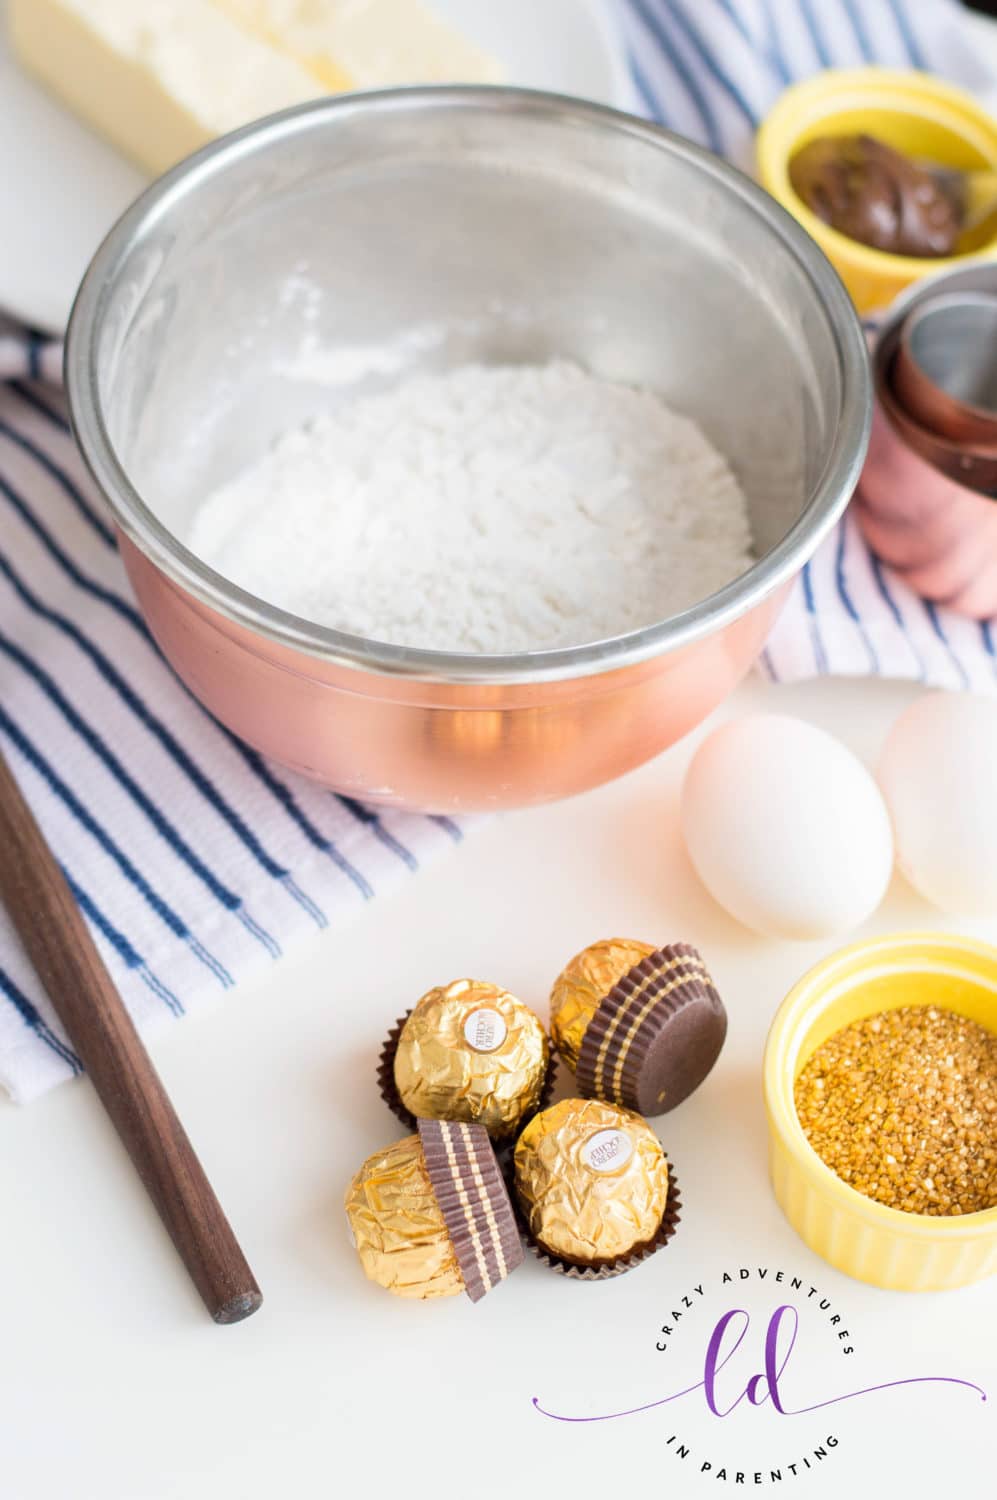 Sift Dry Ingredients to Make Golden Ferrero Rocher New Year's Eve Cupcakes